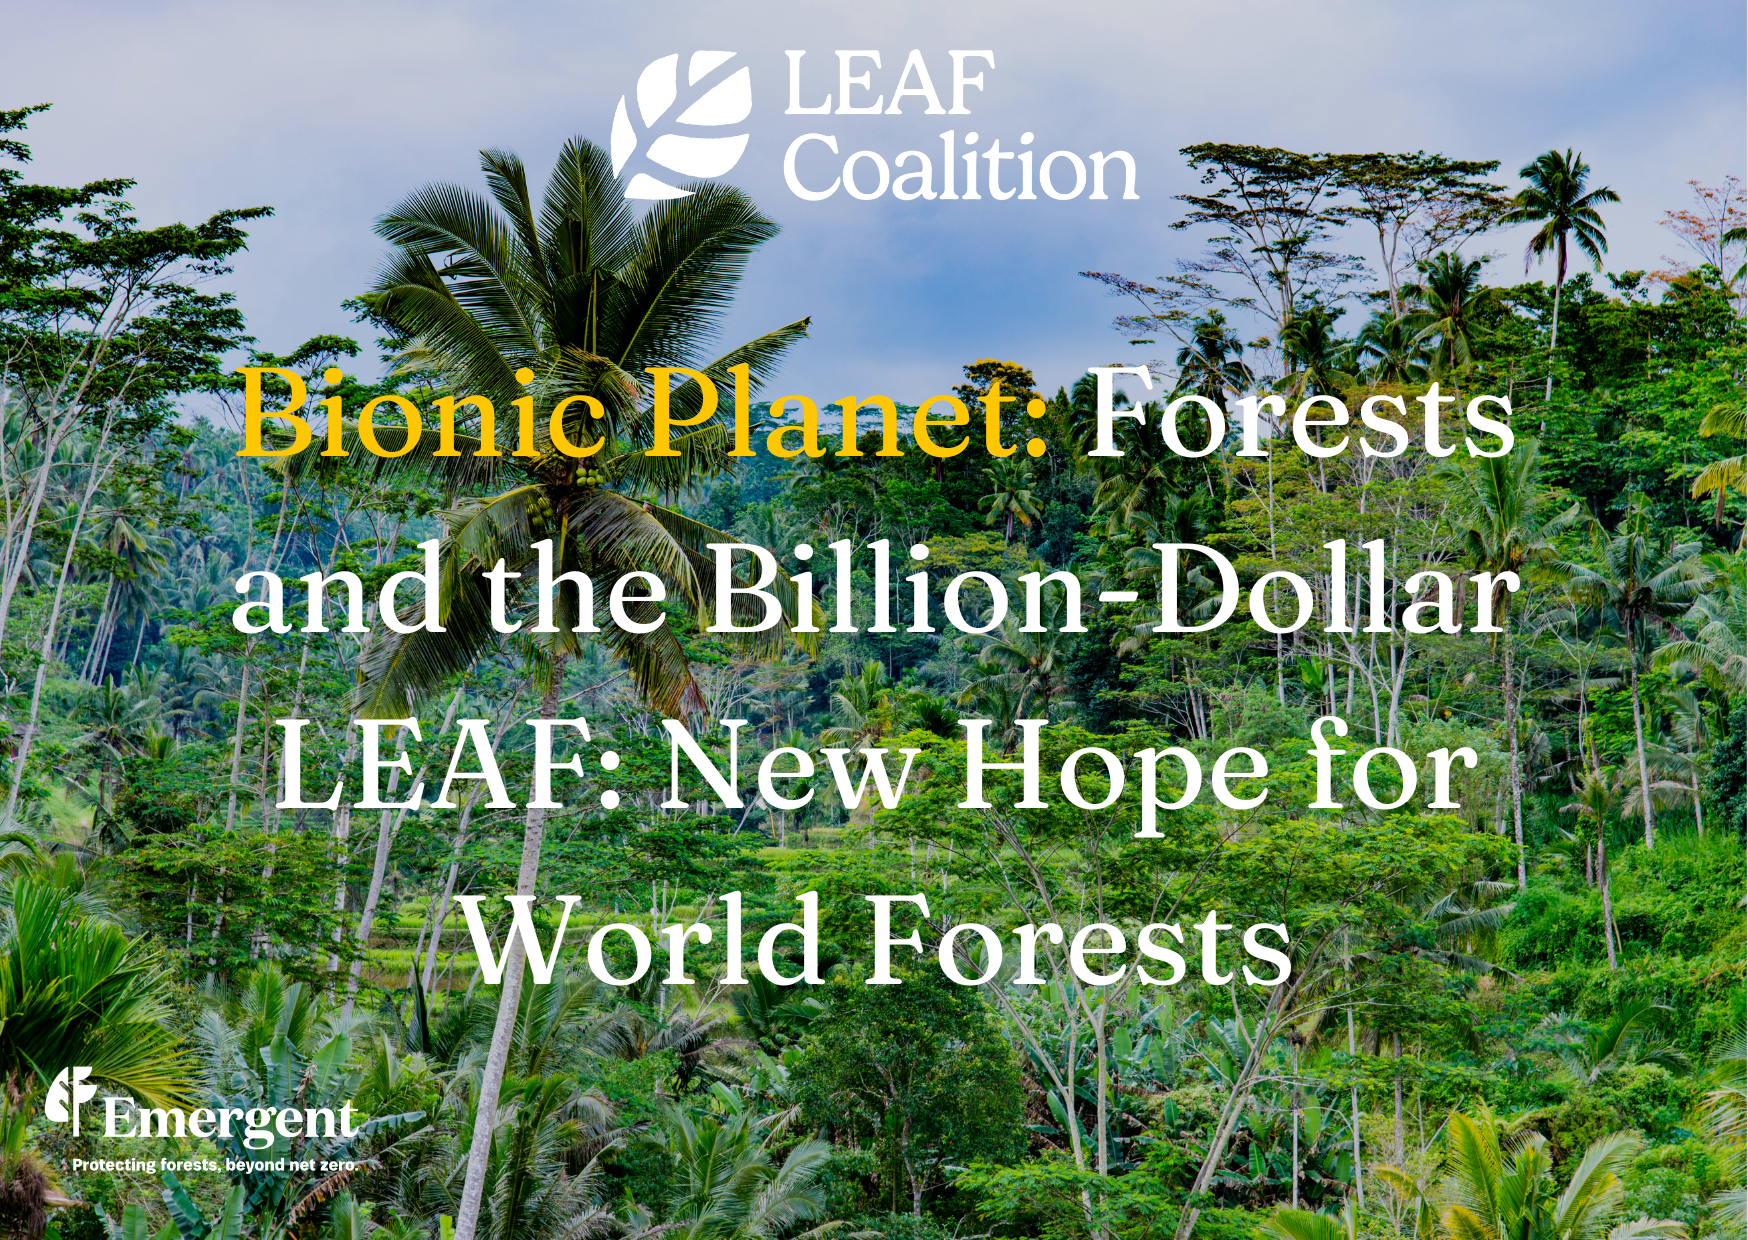 Forests and the Billion-Dollar LEAF: New Hope for World Forests